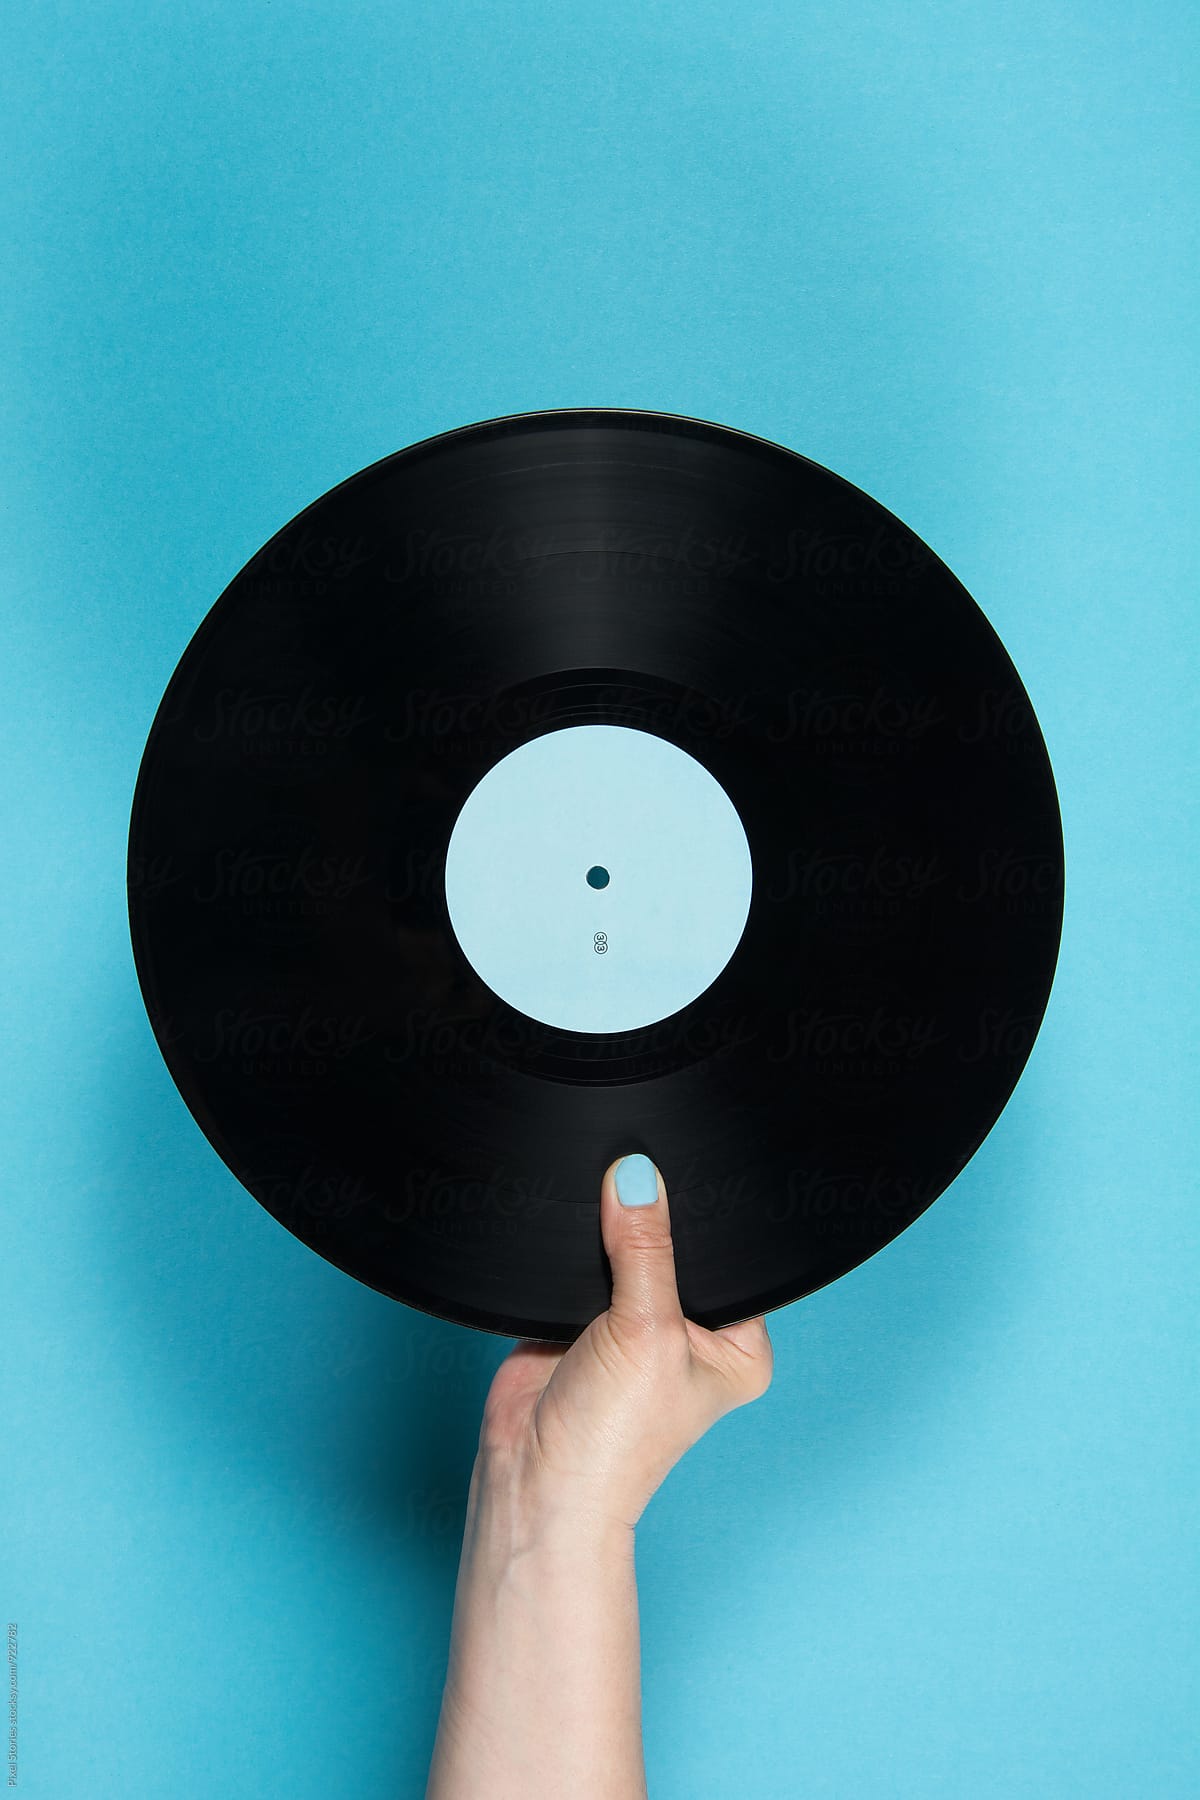 Hand Holding Vinyl Record Over Blue Background by Pixel Stories - Music ...